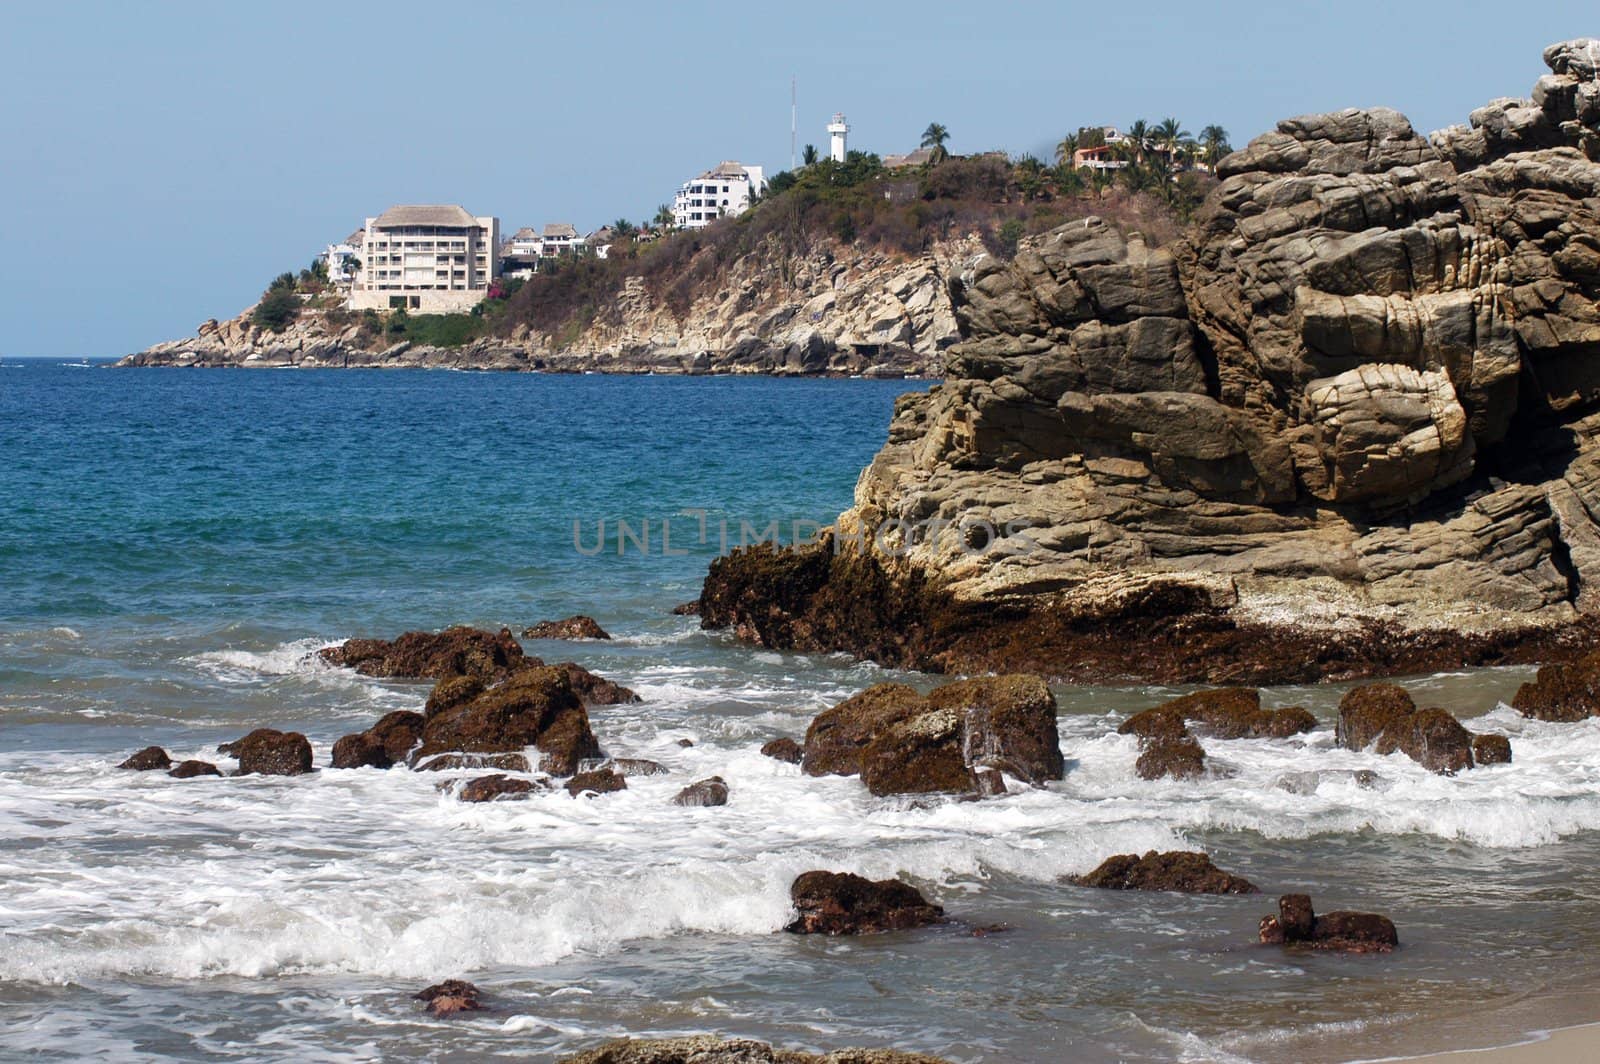 Bay in Puerto Escondido with hotel and lighthouse, Mexico